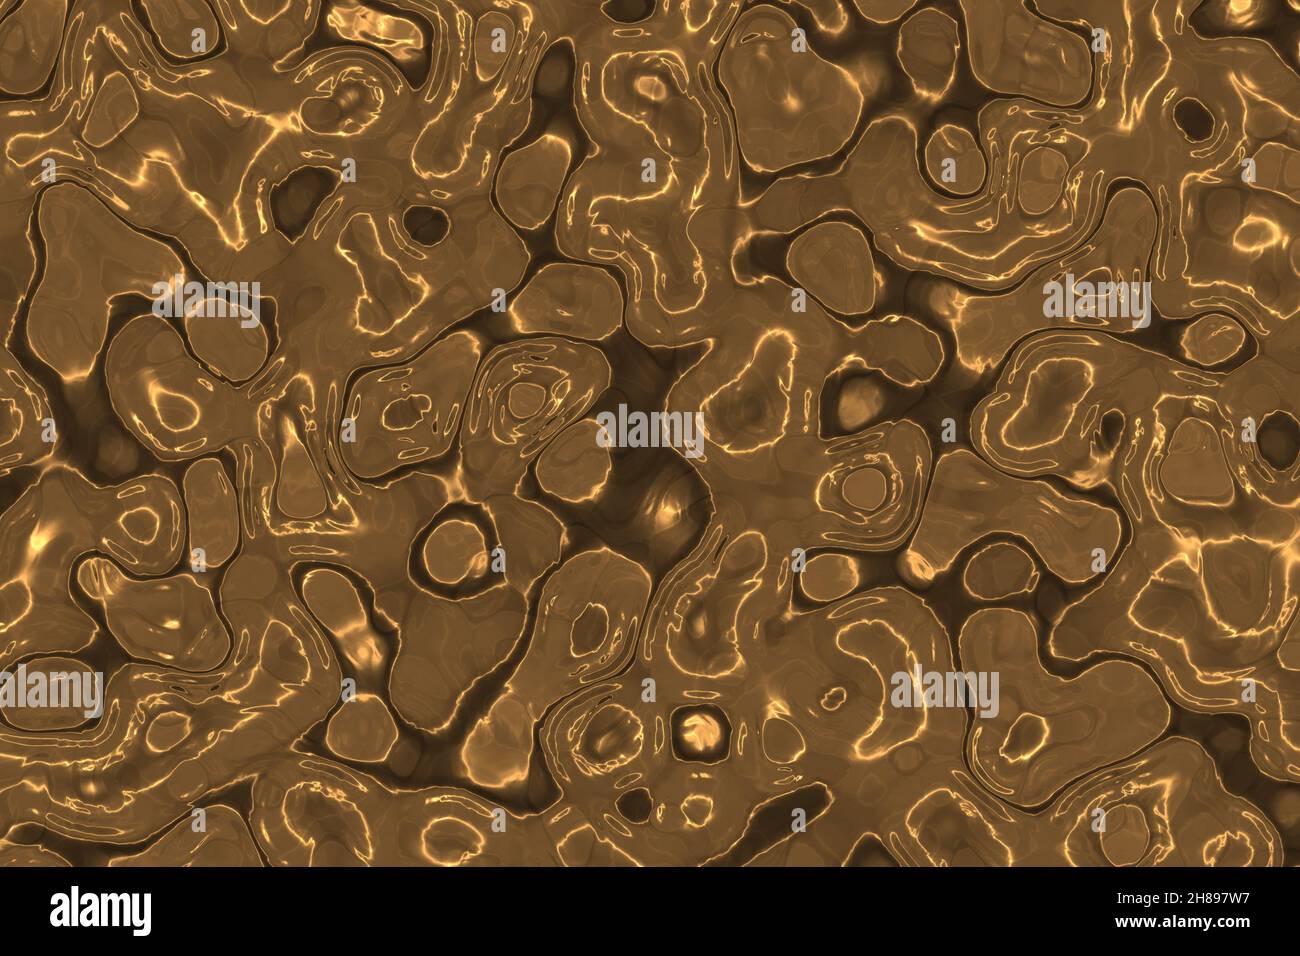 A horizontal background of dark brown watercolor seamless pattern Stock Photo